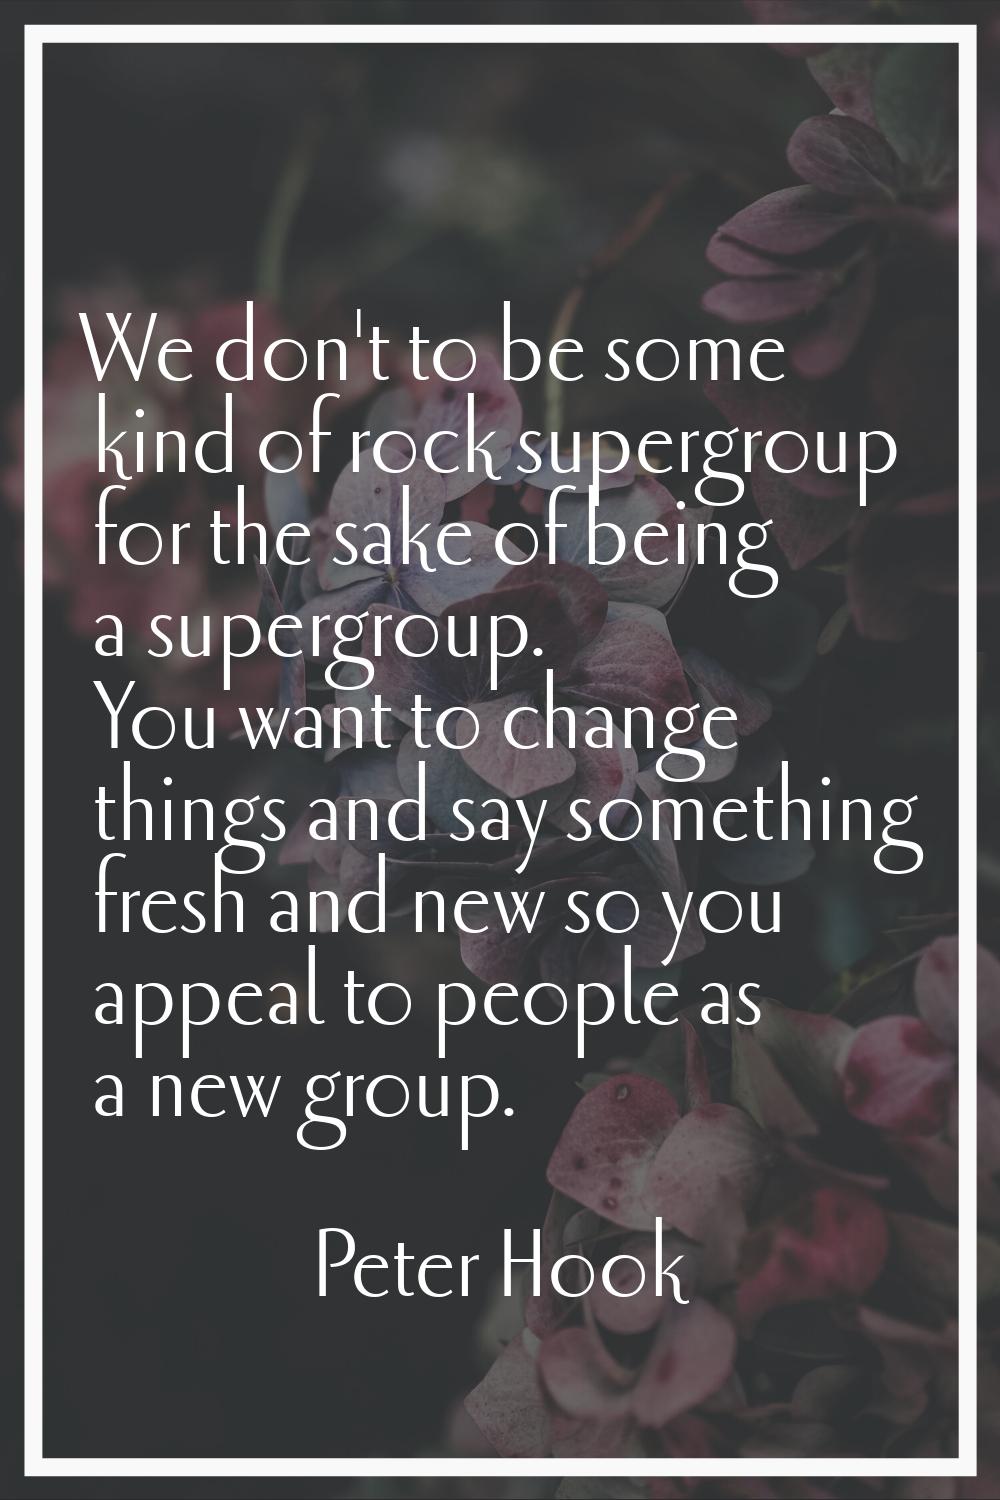 We don't to be some kind of rock supergroup for the sake of being a supergroup. You want to change 